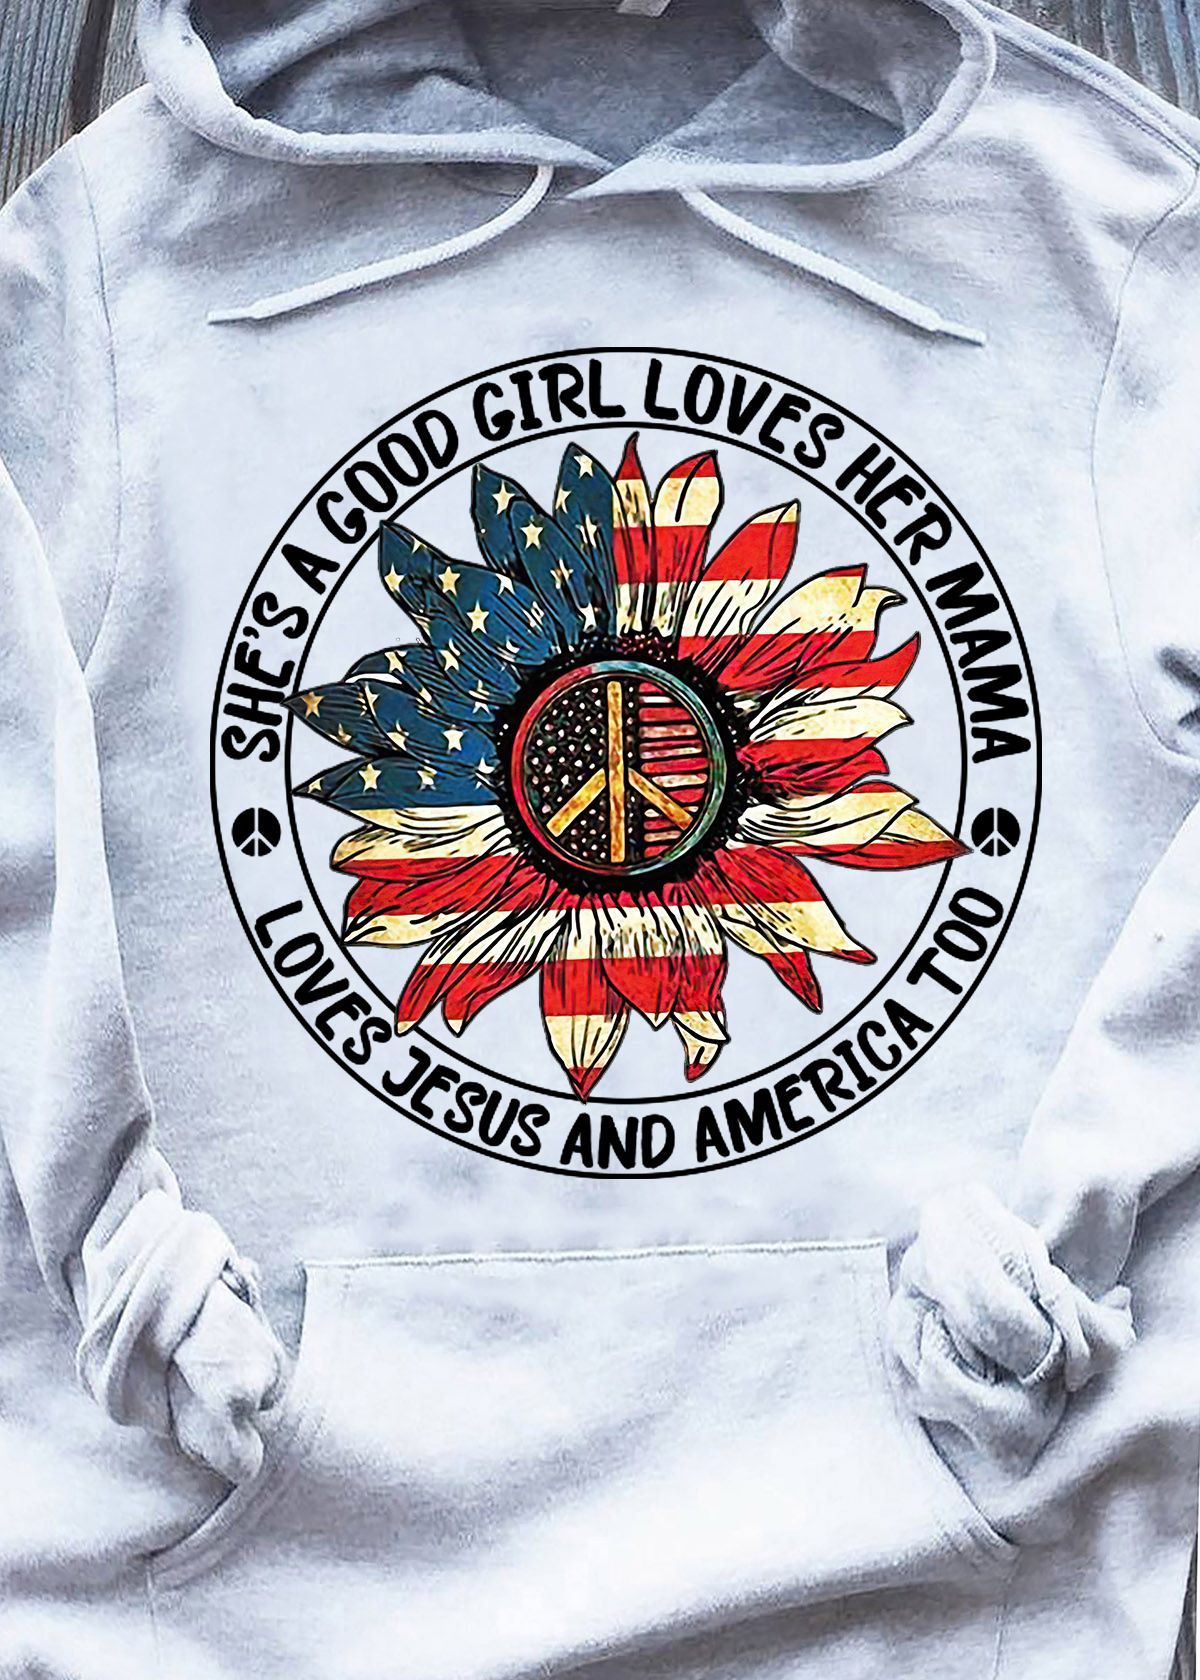 She's A Good Girl Loves Her Mama Love Jesus And America Hippie Hoodie